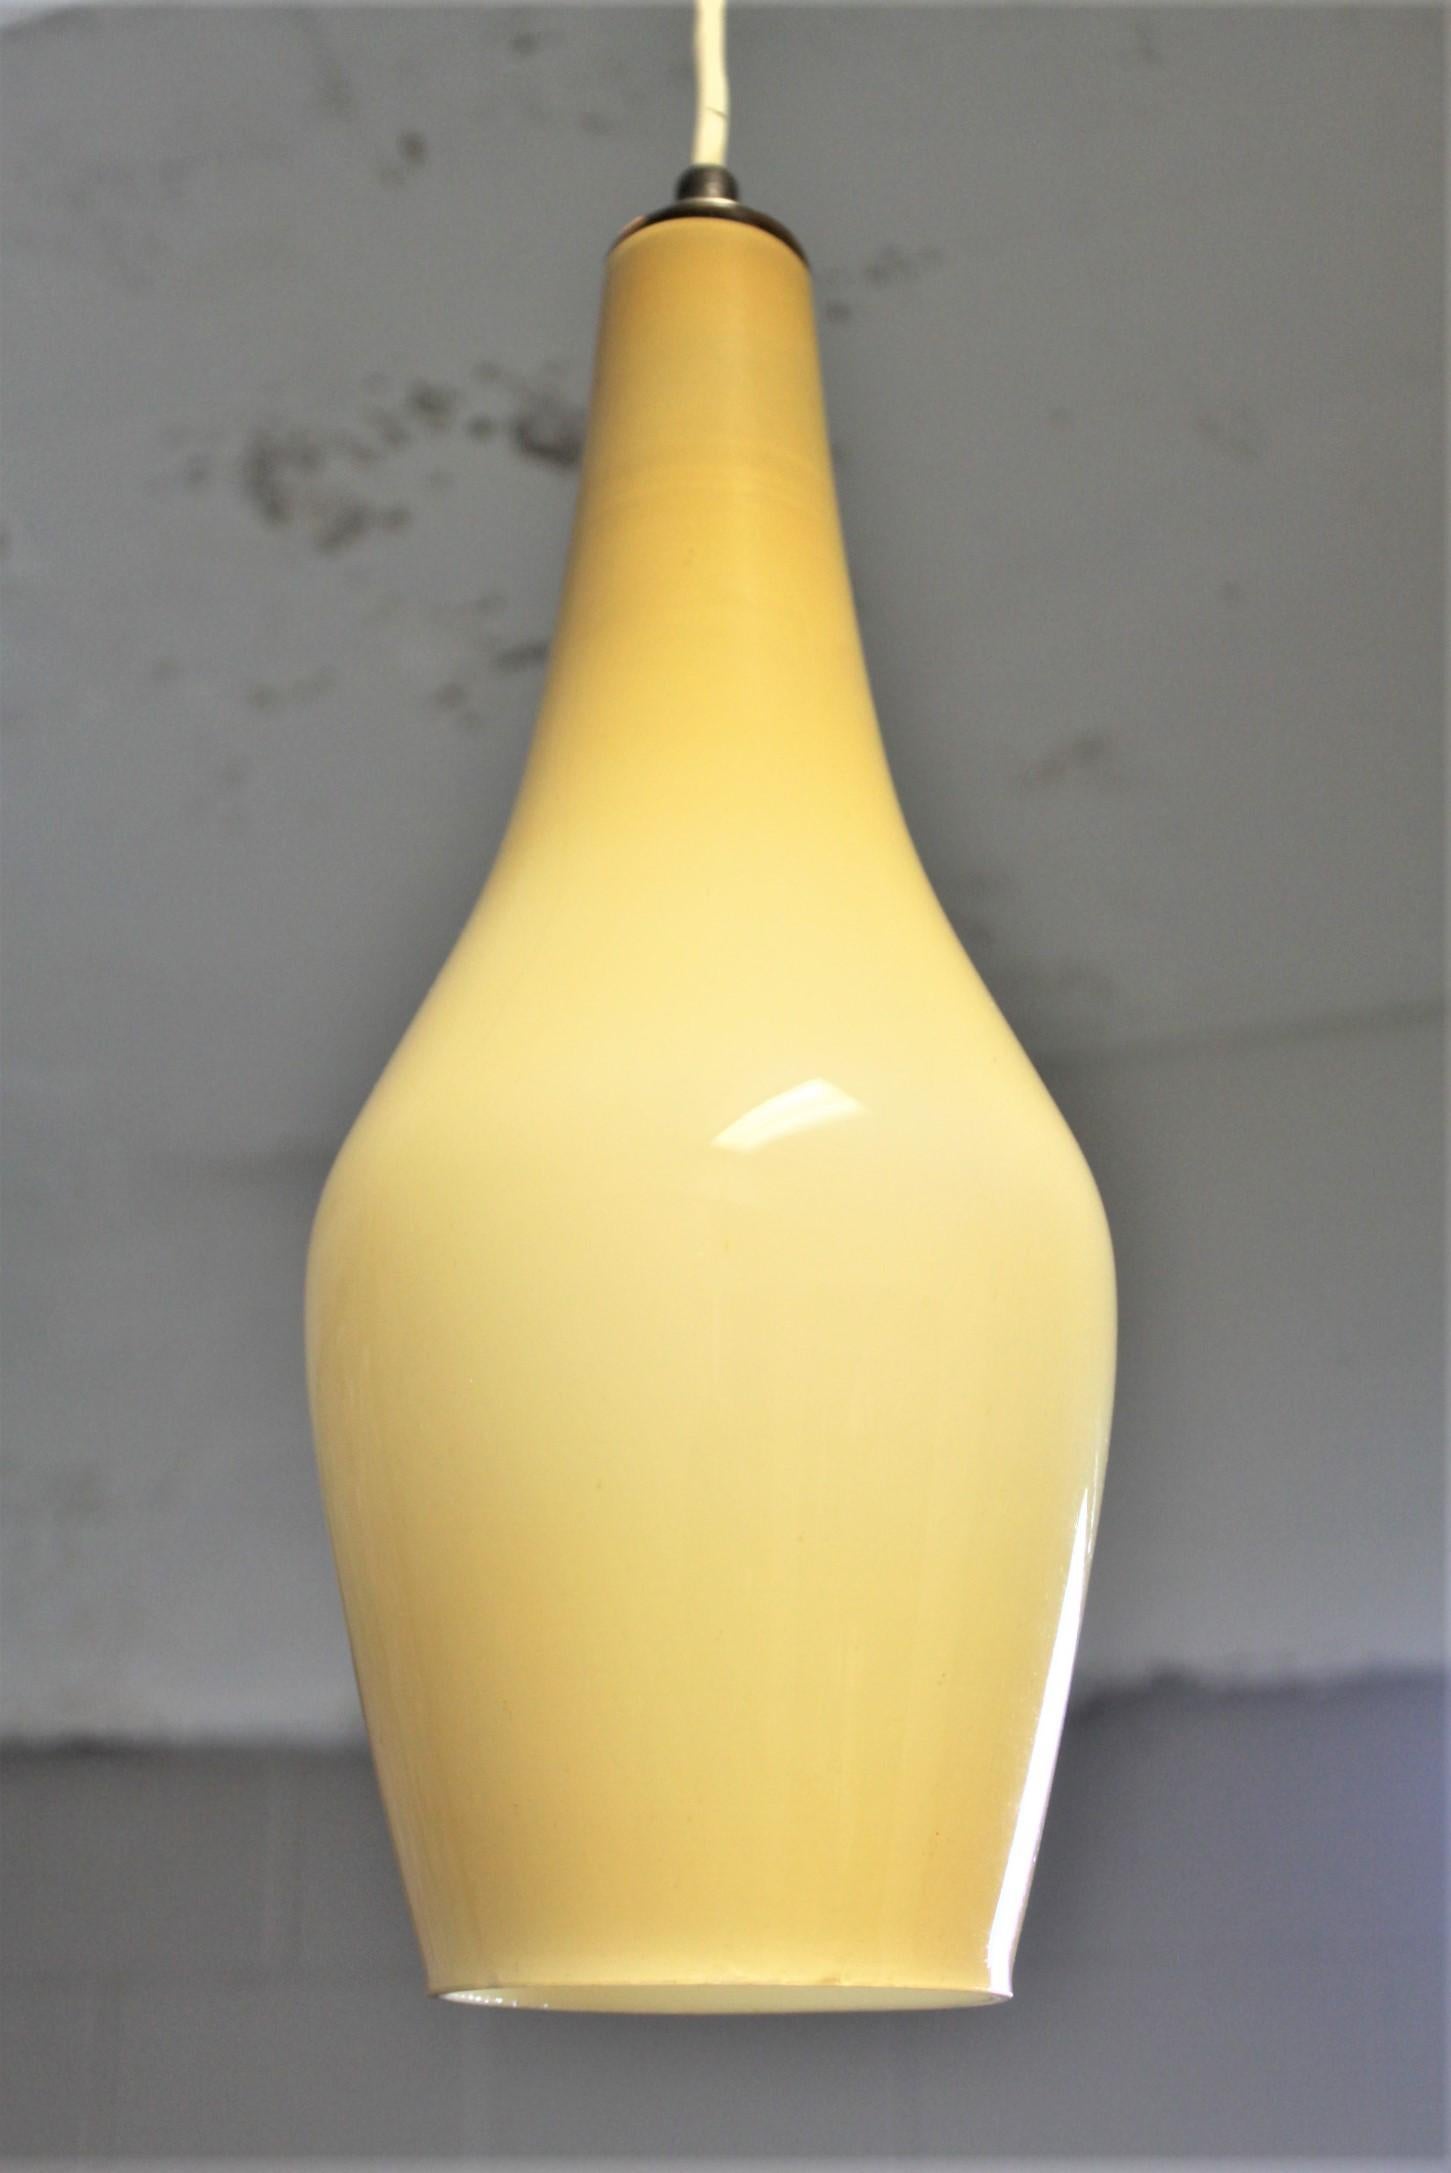 This handcrafted cased glass pendant light fixture is unsigned, but presumed to have been made in Italy or Scandinavia in circa 1965 in the midcentury fog and Morup style. The shade is done in a deep yellow or gold colored glass over white with a